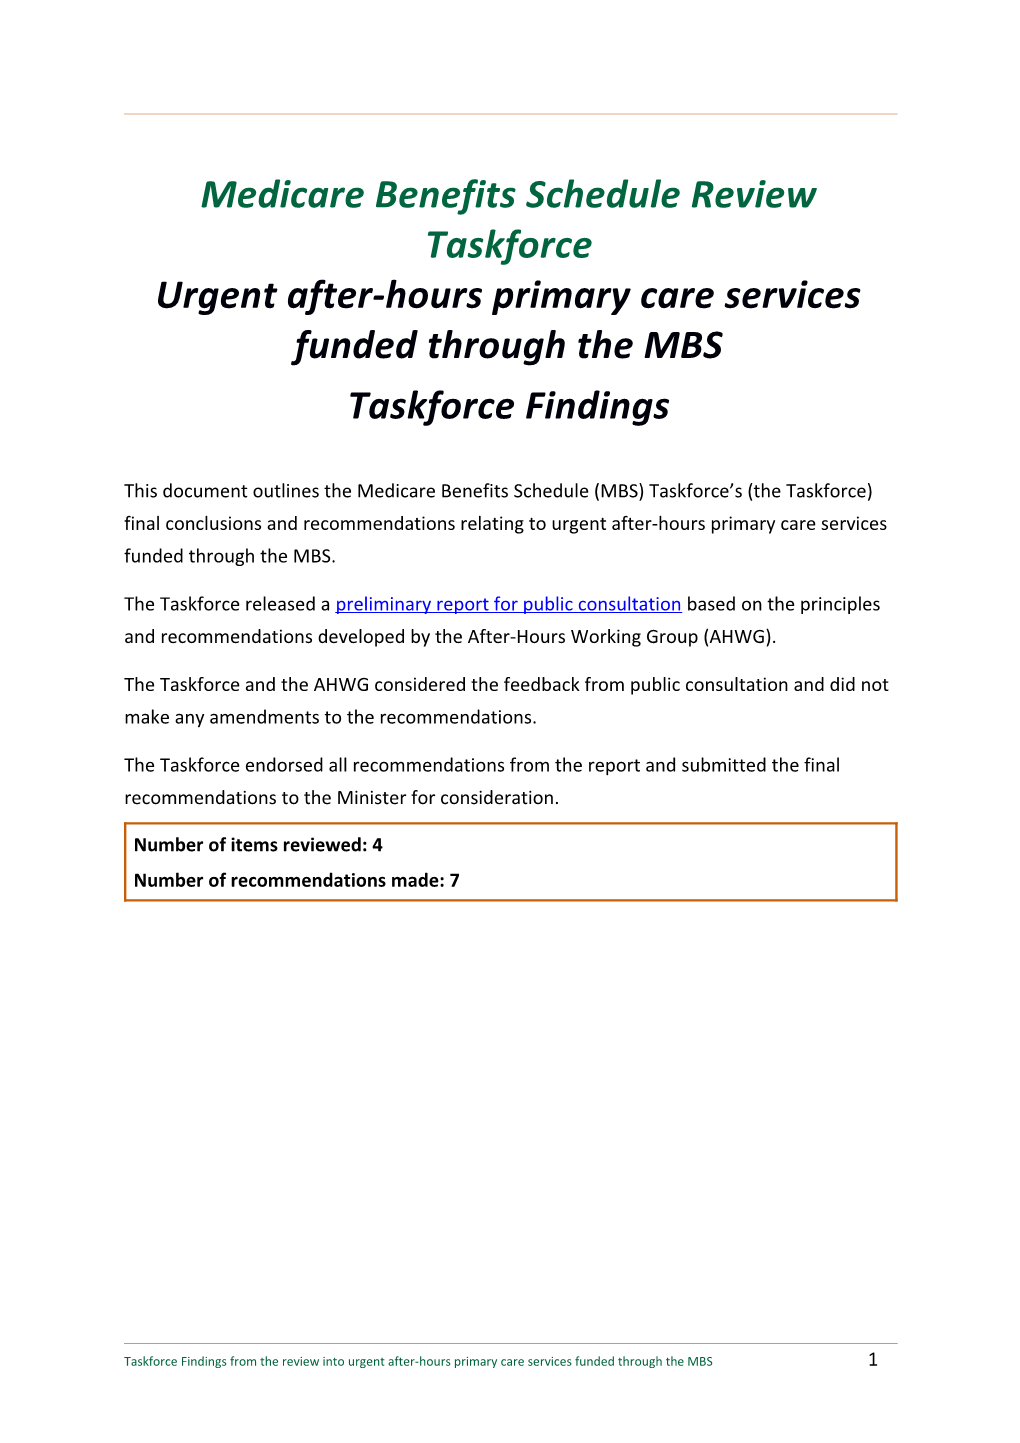 Medicare Benefits Schedule Reviewtaskforce Urgent After-Hours Primary Care Services Funded